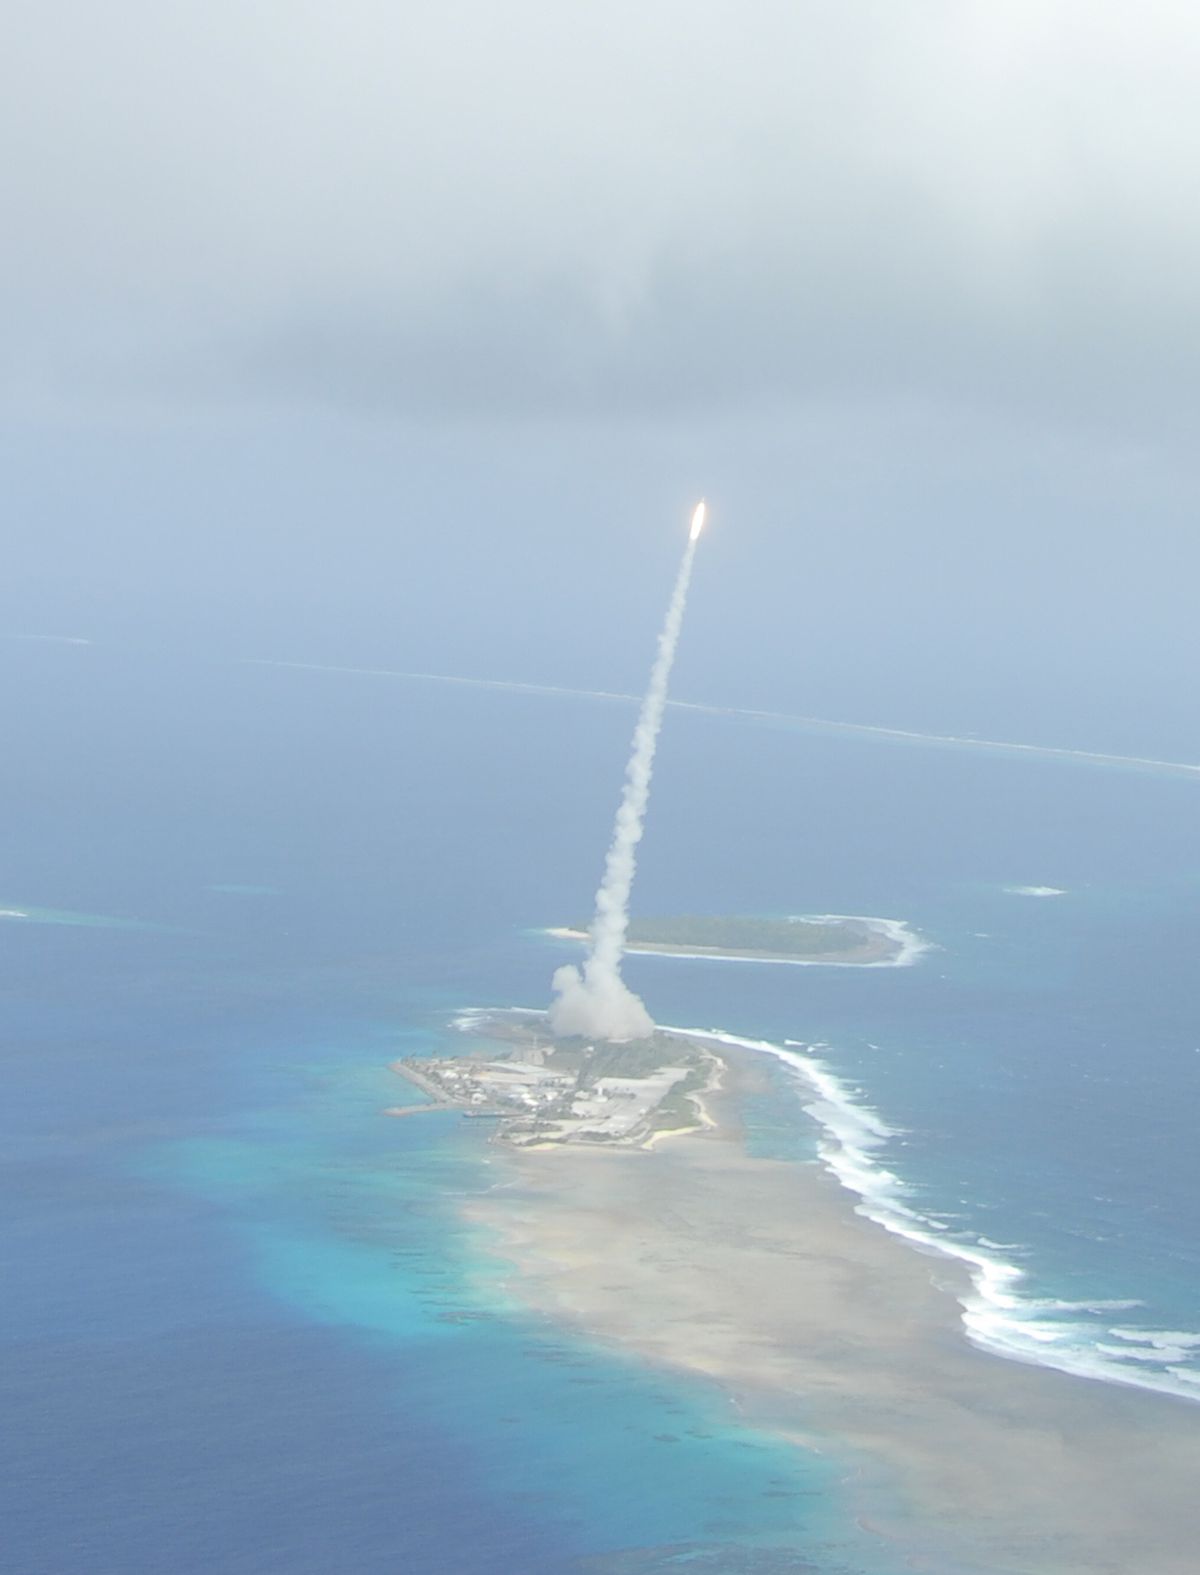 Launch of a target for a 2010 test from the U.S. Army's Reagan Test Site at Kwajalein Atoll